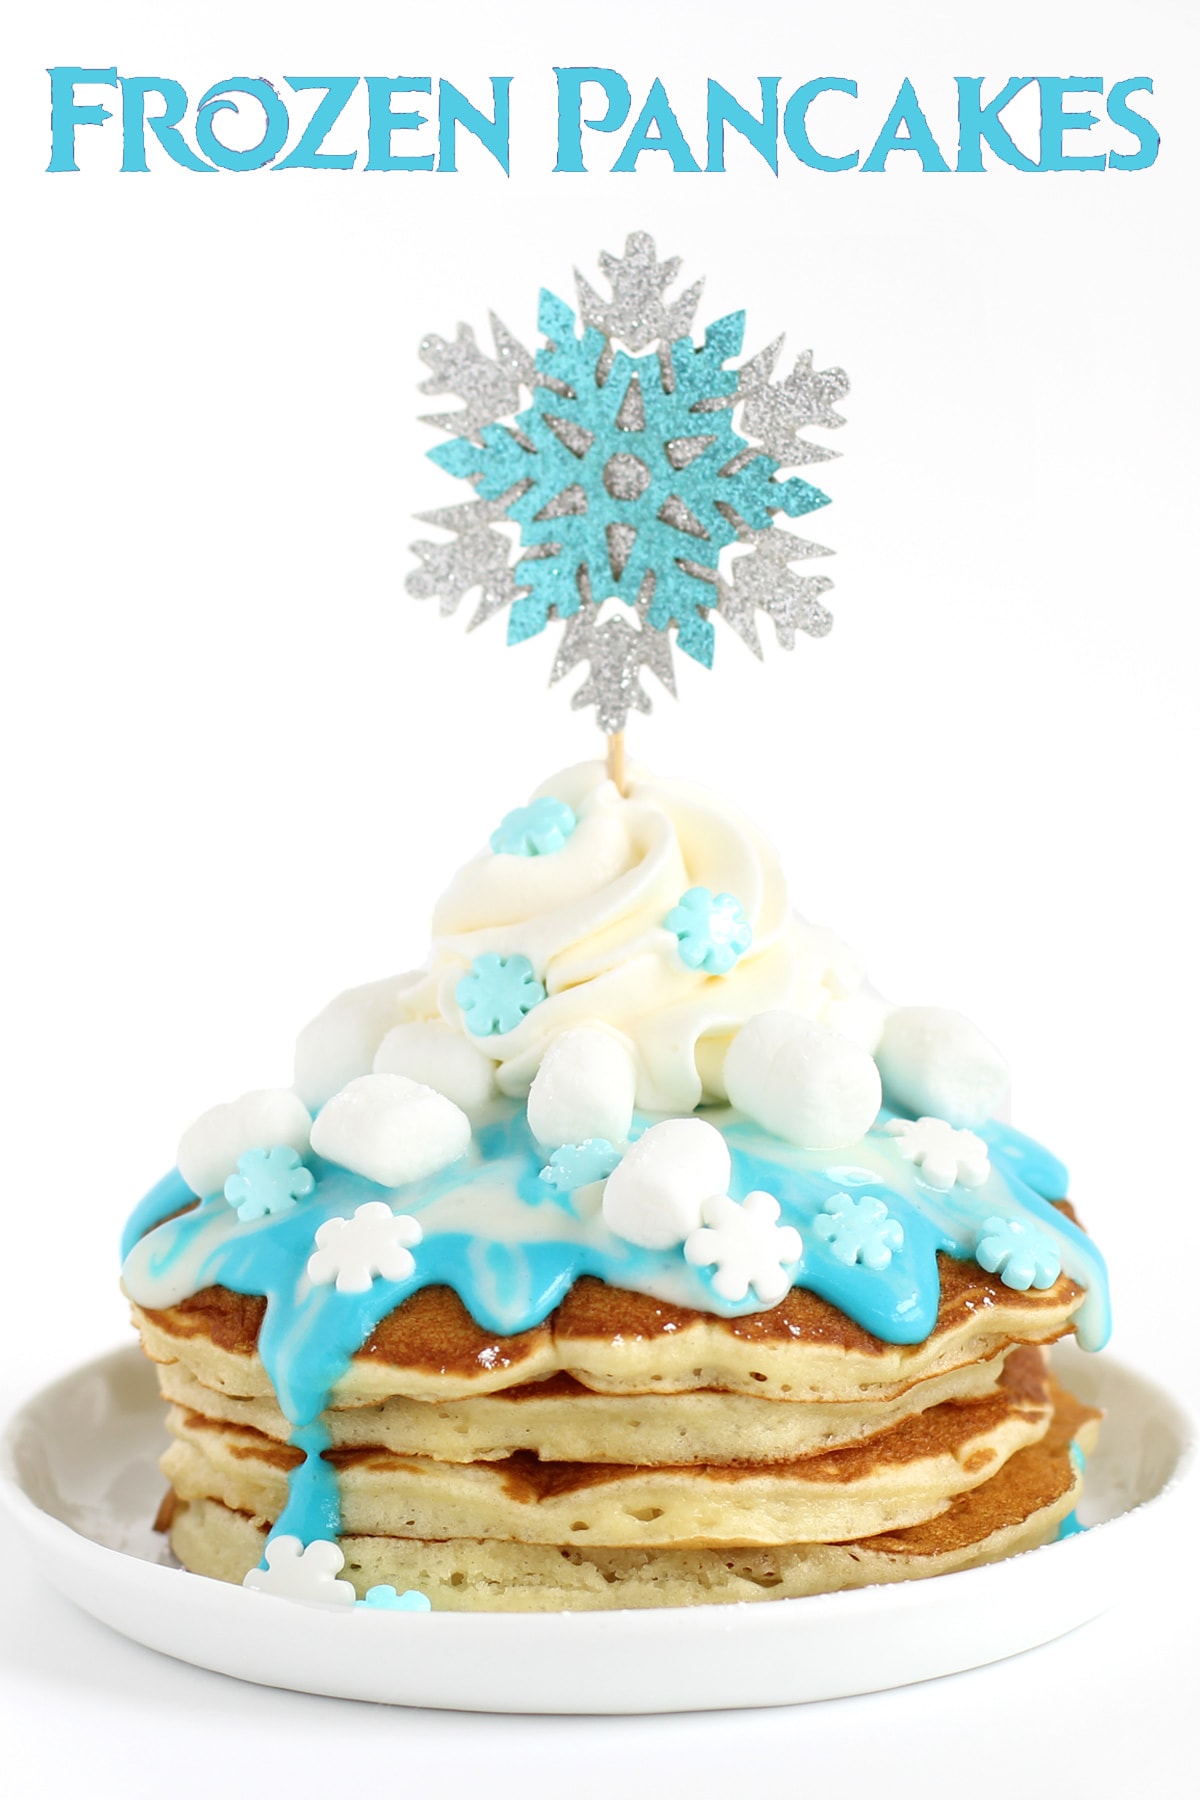 Frozen Pancakes - buttermilk pancakes topped with candy snowflakes, marshmallows, whipped cream, and blue and white cream cheese icing.